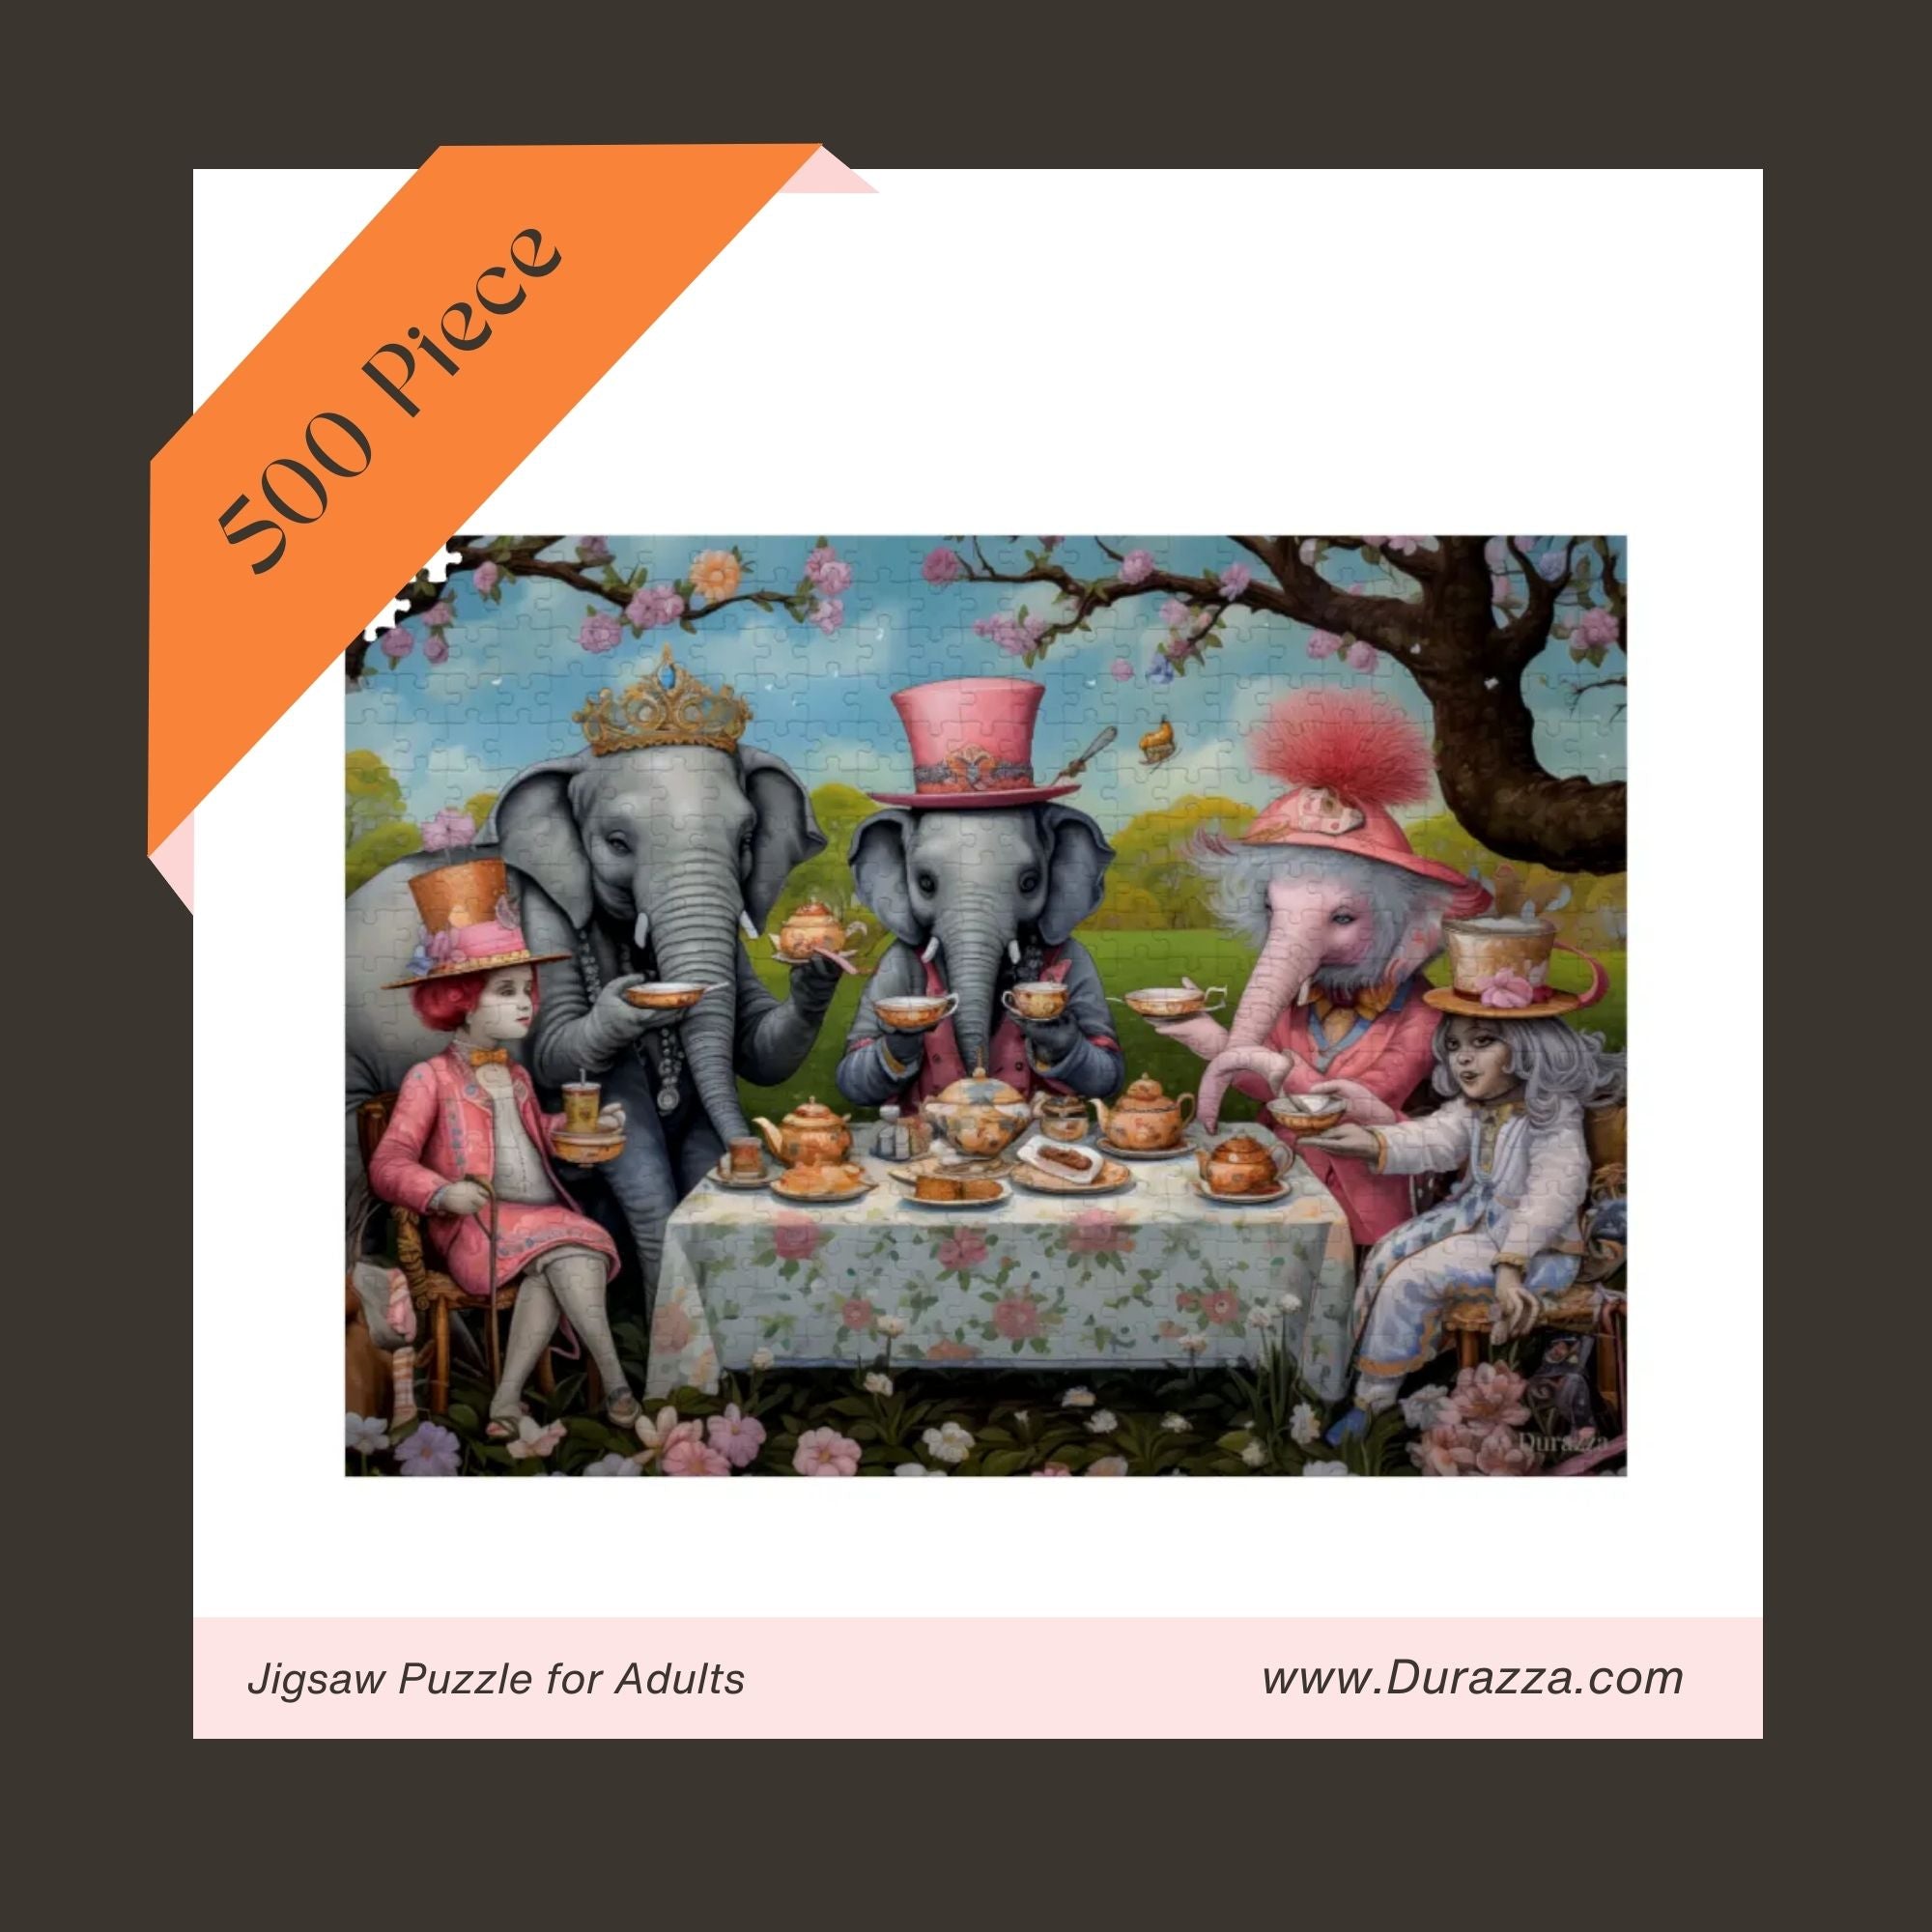 Peculiar Tea Party Wooden Jigsaw Puzzle: 500 or 1000